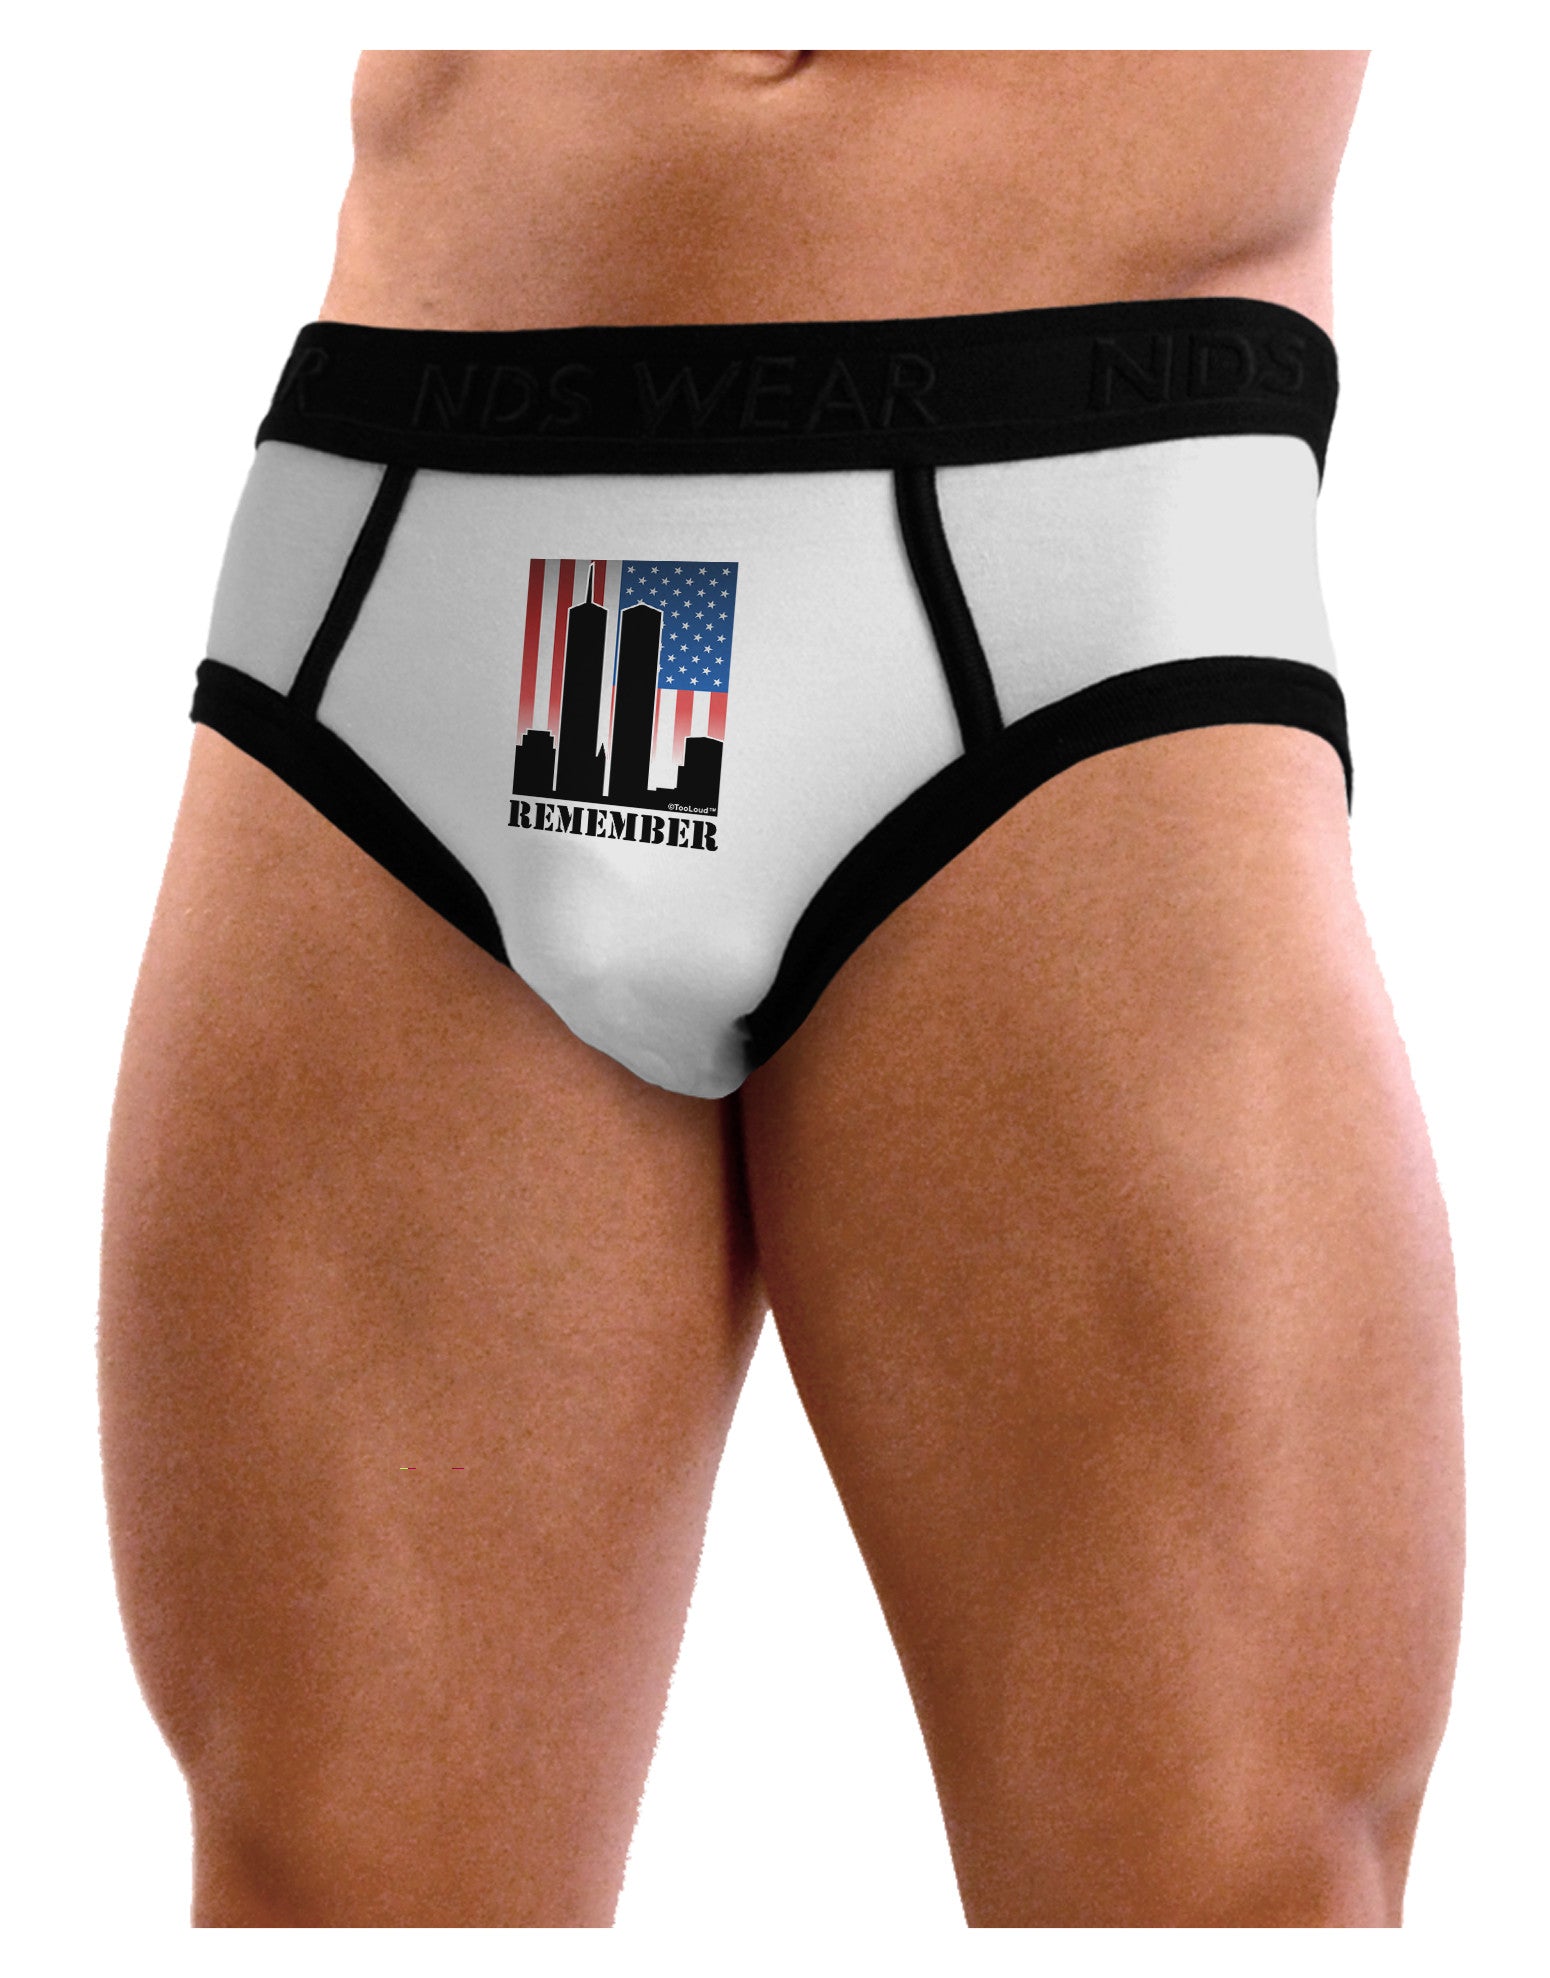 Custom Personalized Image and Text Mens NDS Wear Briefs Underwear - Davson  Sales